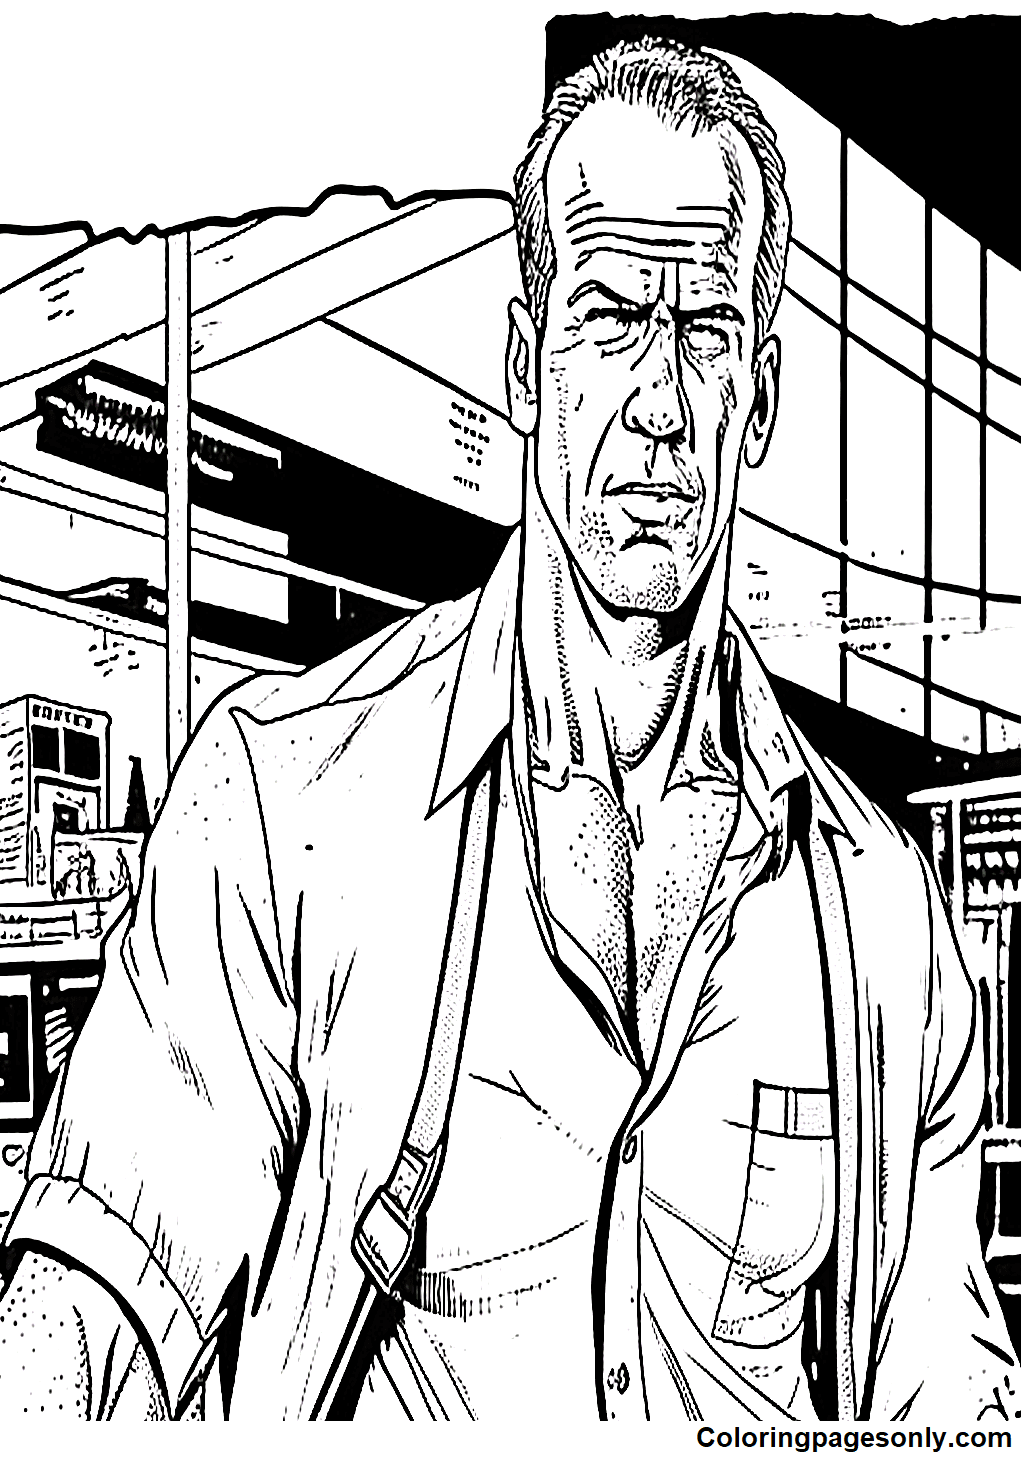 Bruce Willis as John McClane Image Coloring Pages